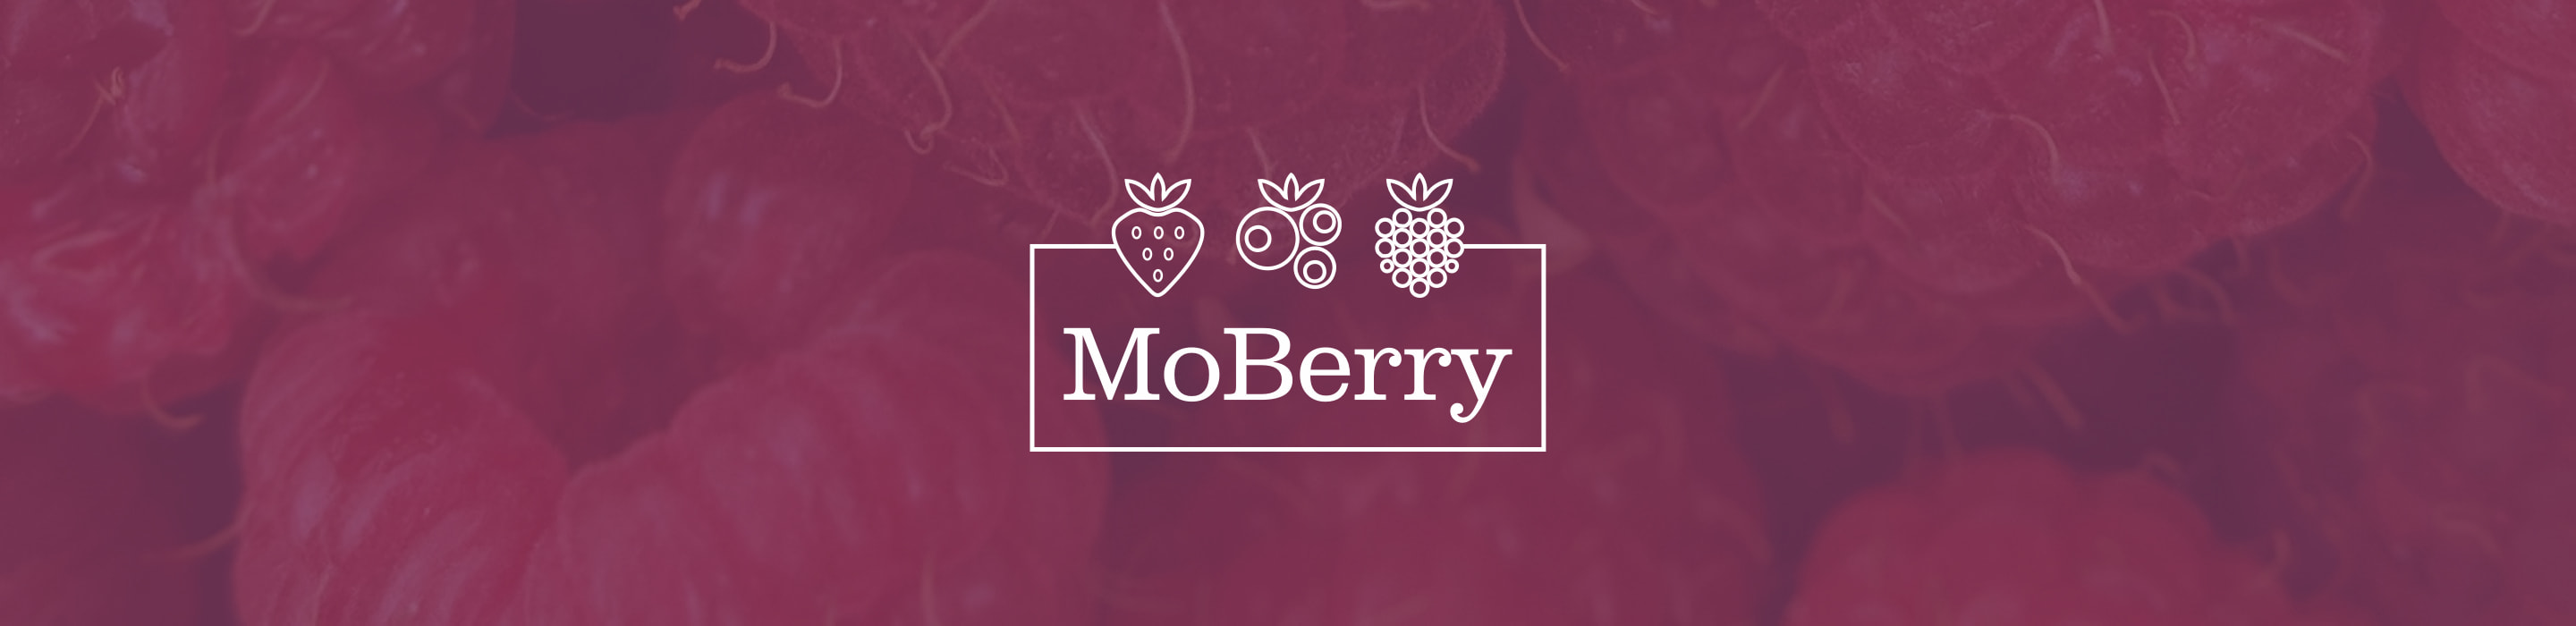 About MoBerry